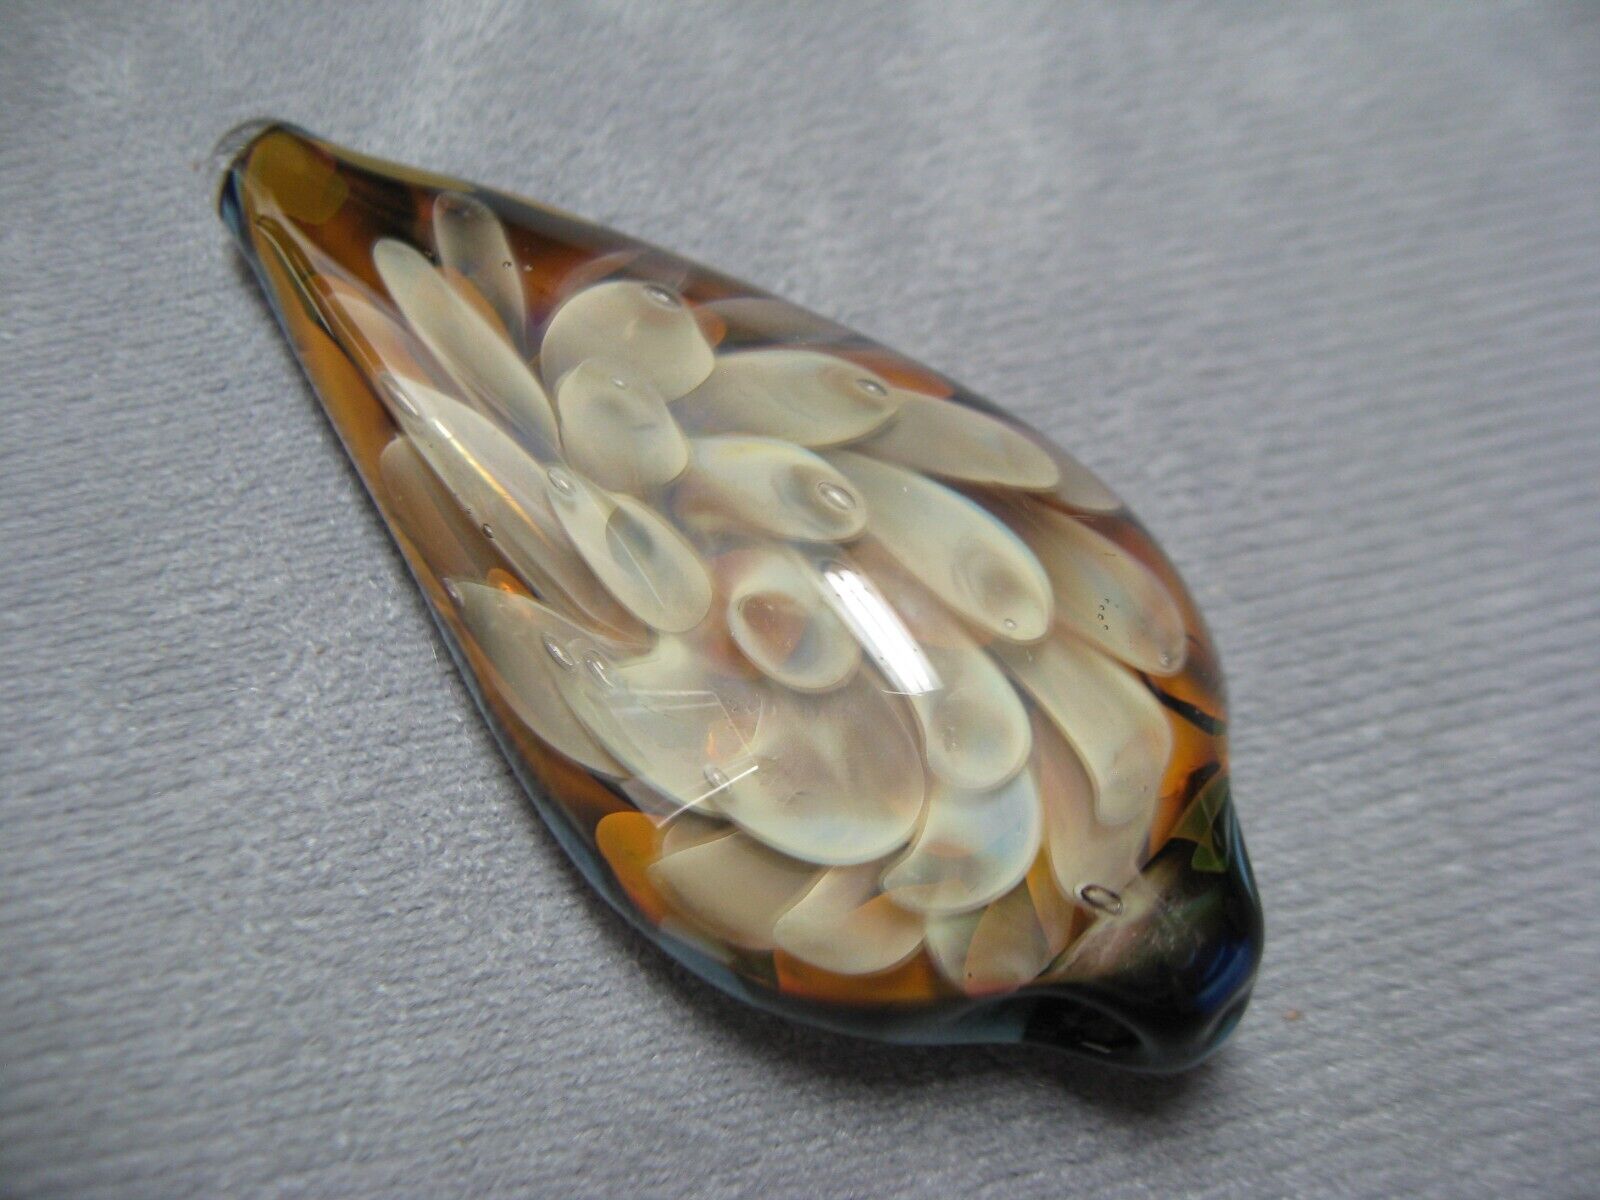 Special American Lampwork Glass Bead by Irene Stuart of T.C. Glass Arts